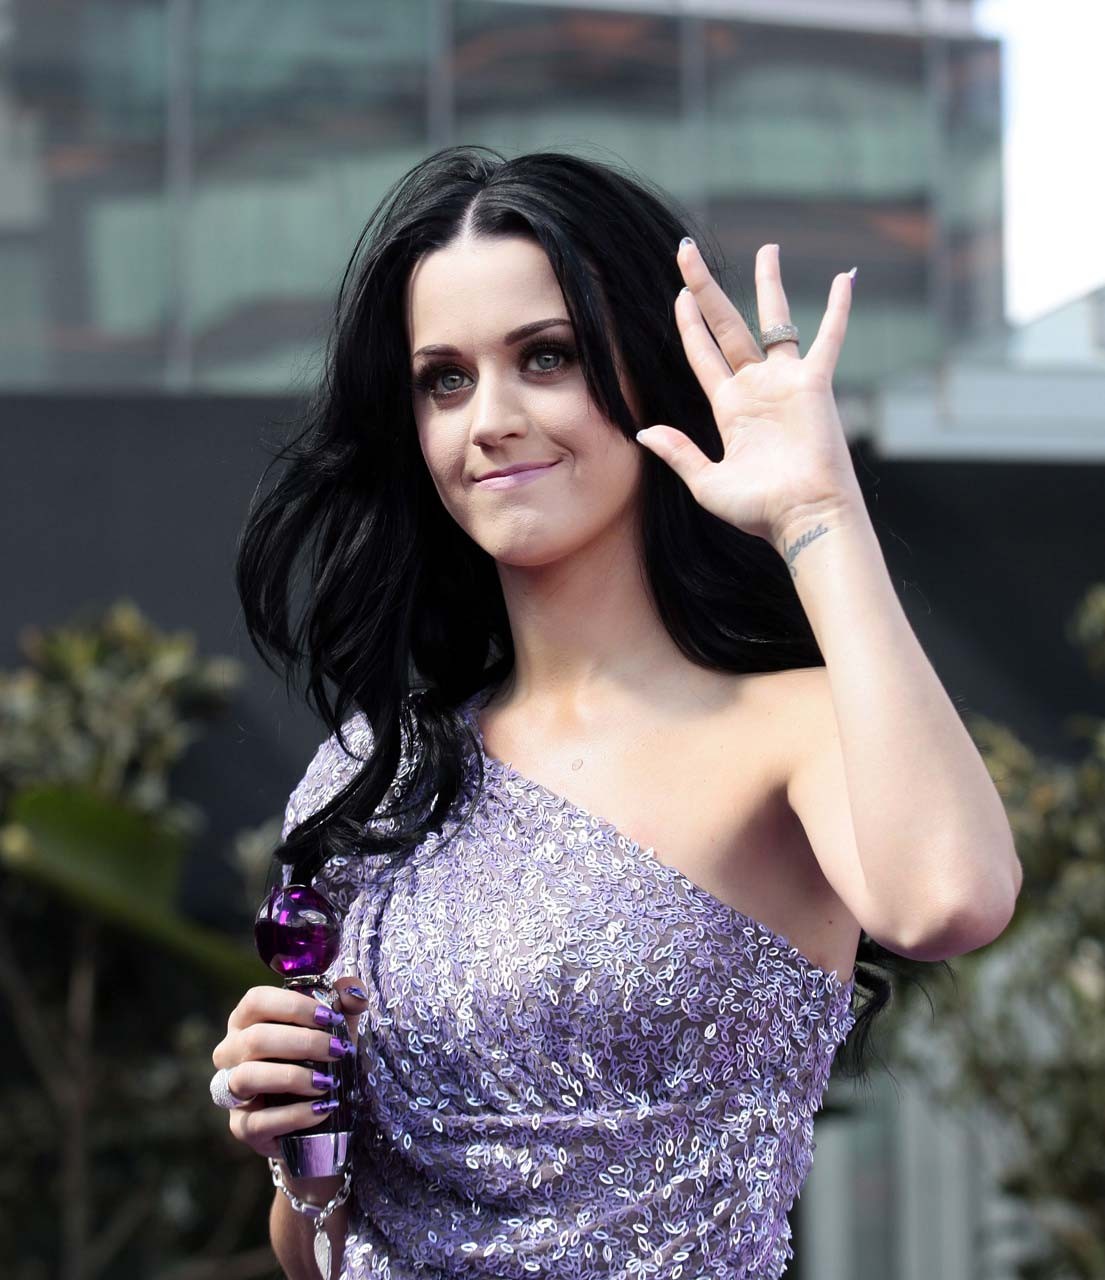 Katy Perry showng her panties in mini skirt and nipple slip paparazzi pictures #75318651